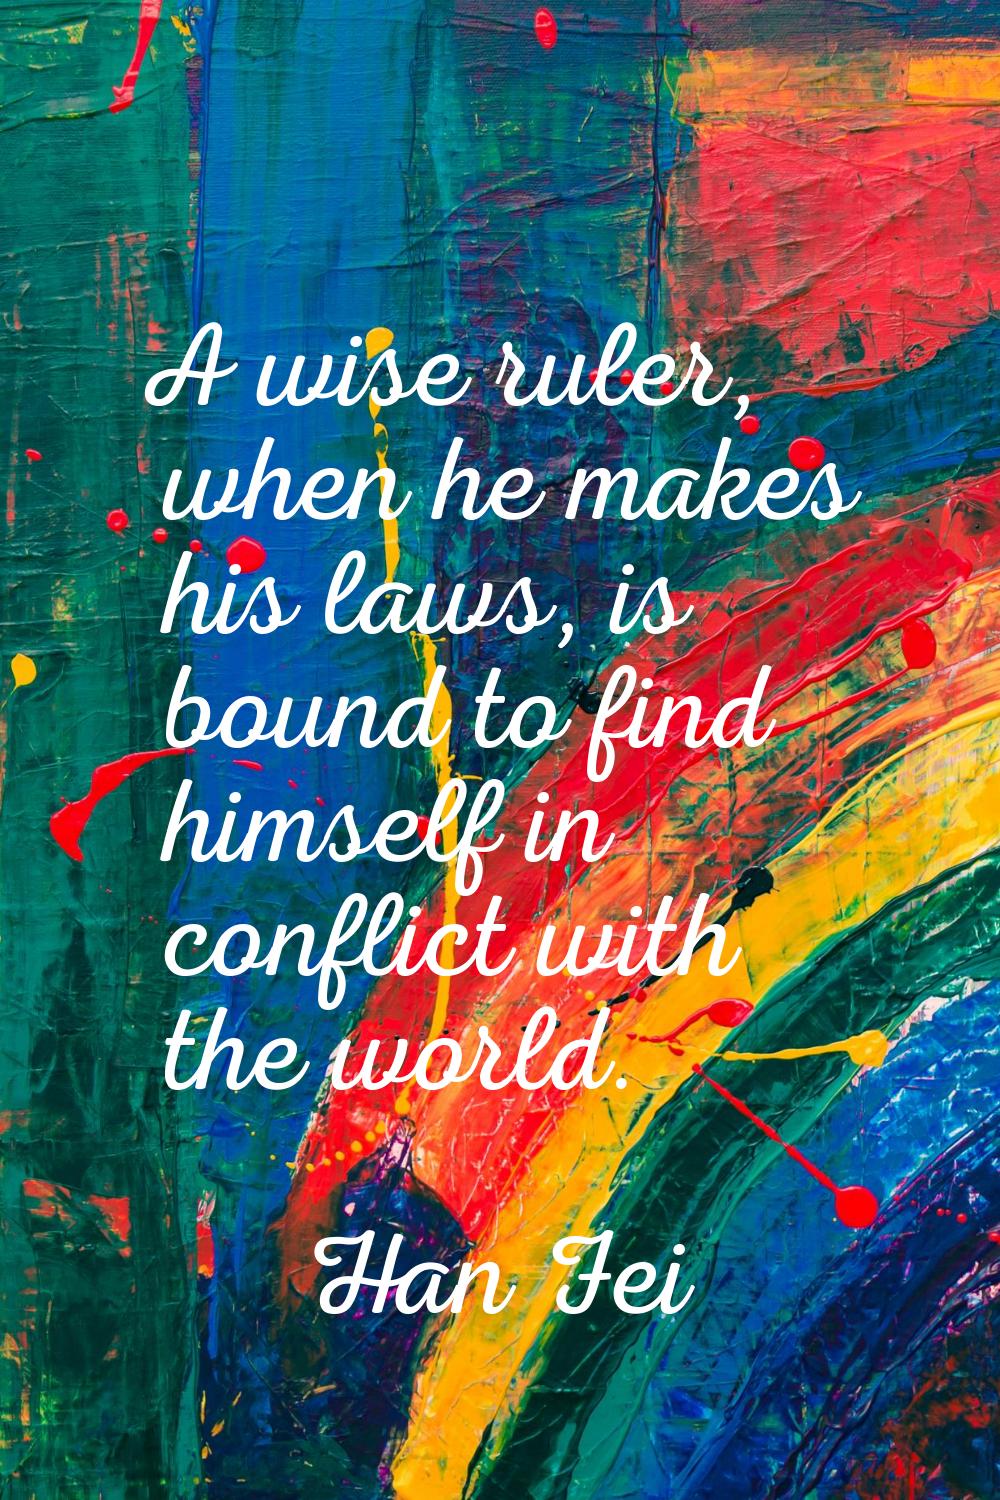 A wise ruler, when he makes his laws, is bound to find himself in conflict with the world.